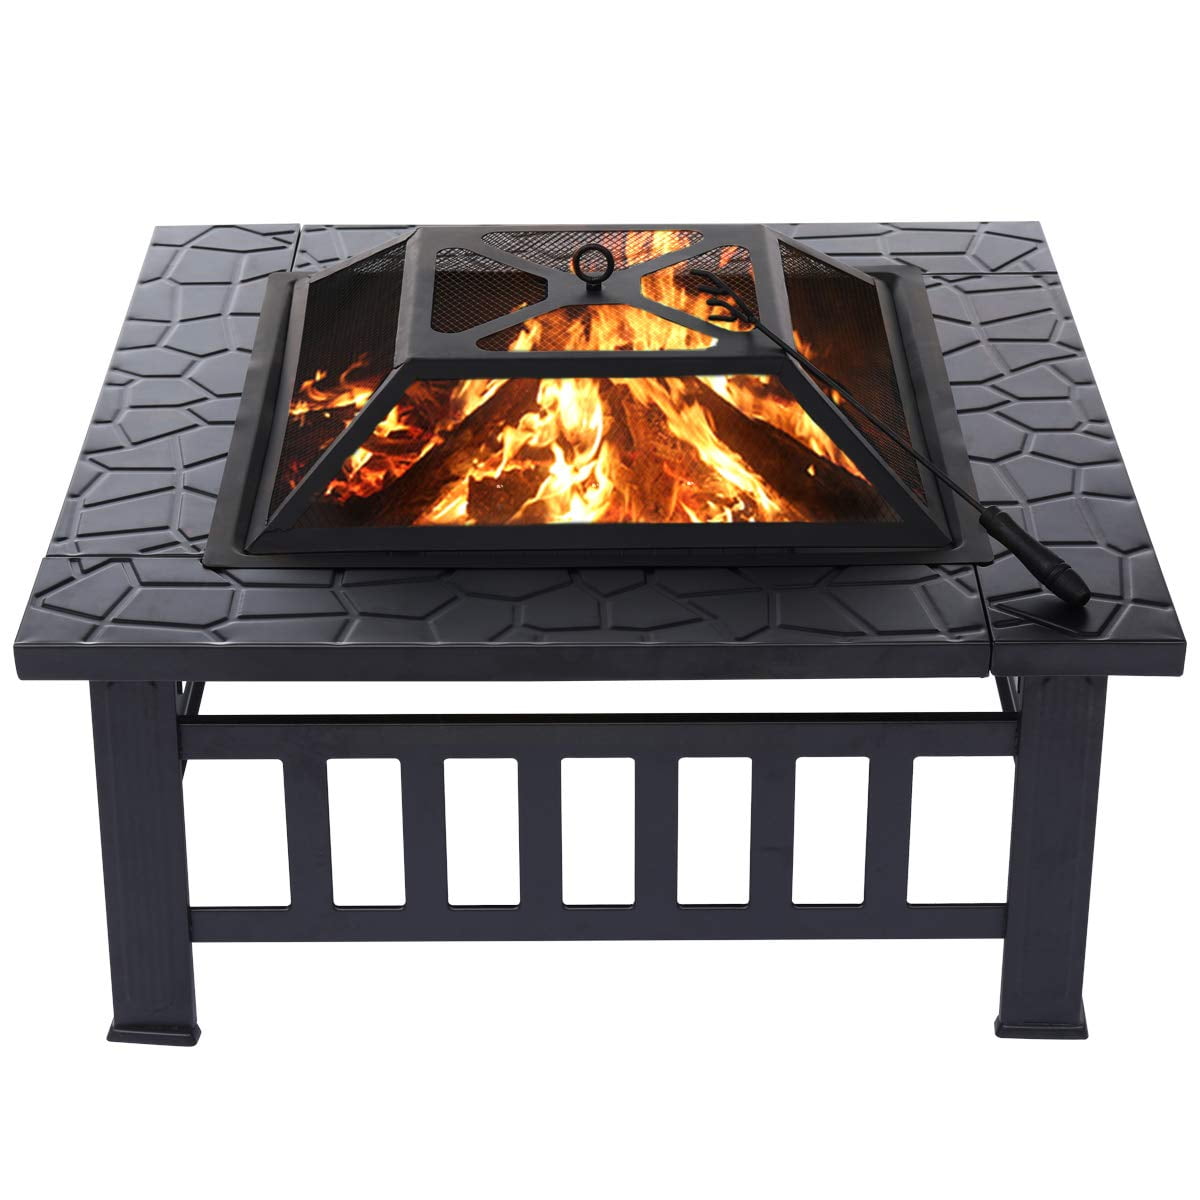 EZCHEER 34 Outdoor Fire Pit 3 in 1 Metal Square Firepit Wood Burning Bonfire Stove for Backyard Patio Garden with Grill Log Poker Spark Screen Cover 